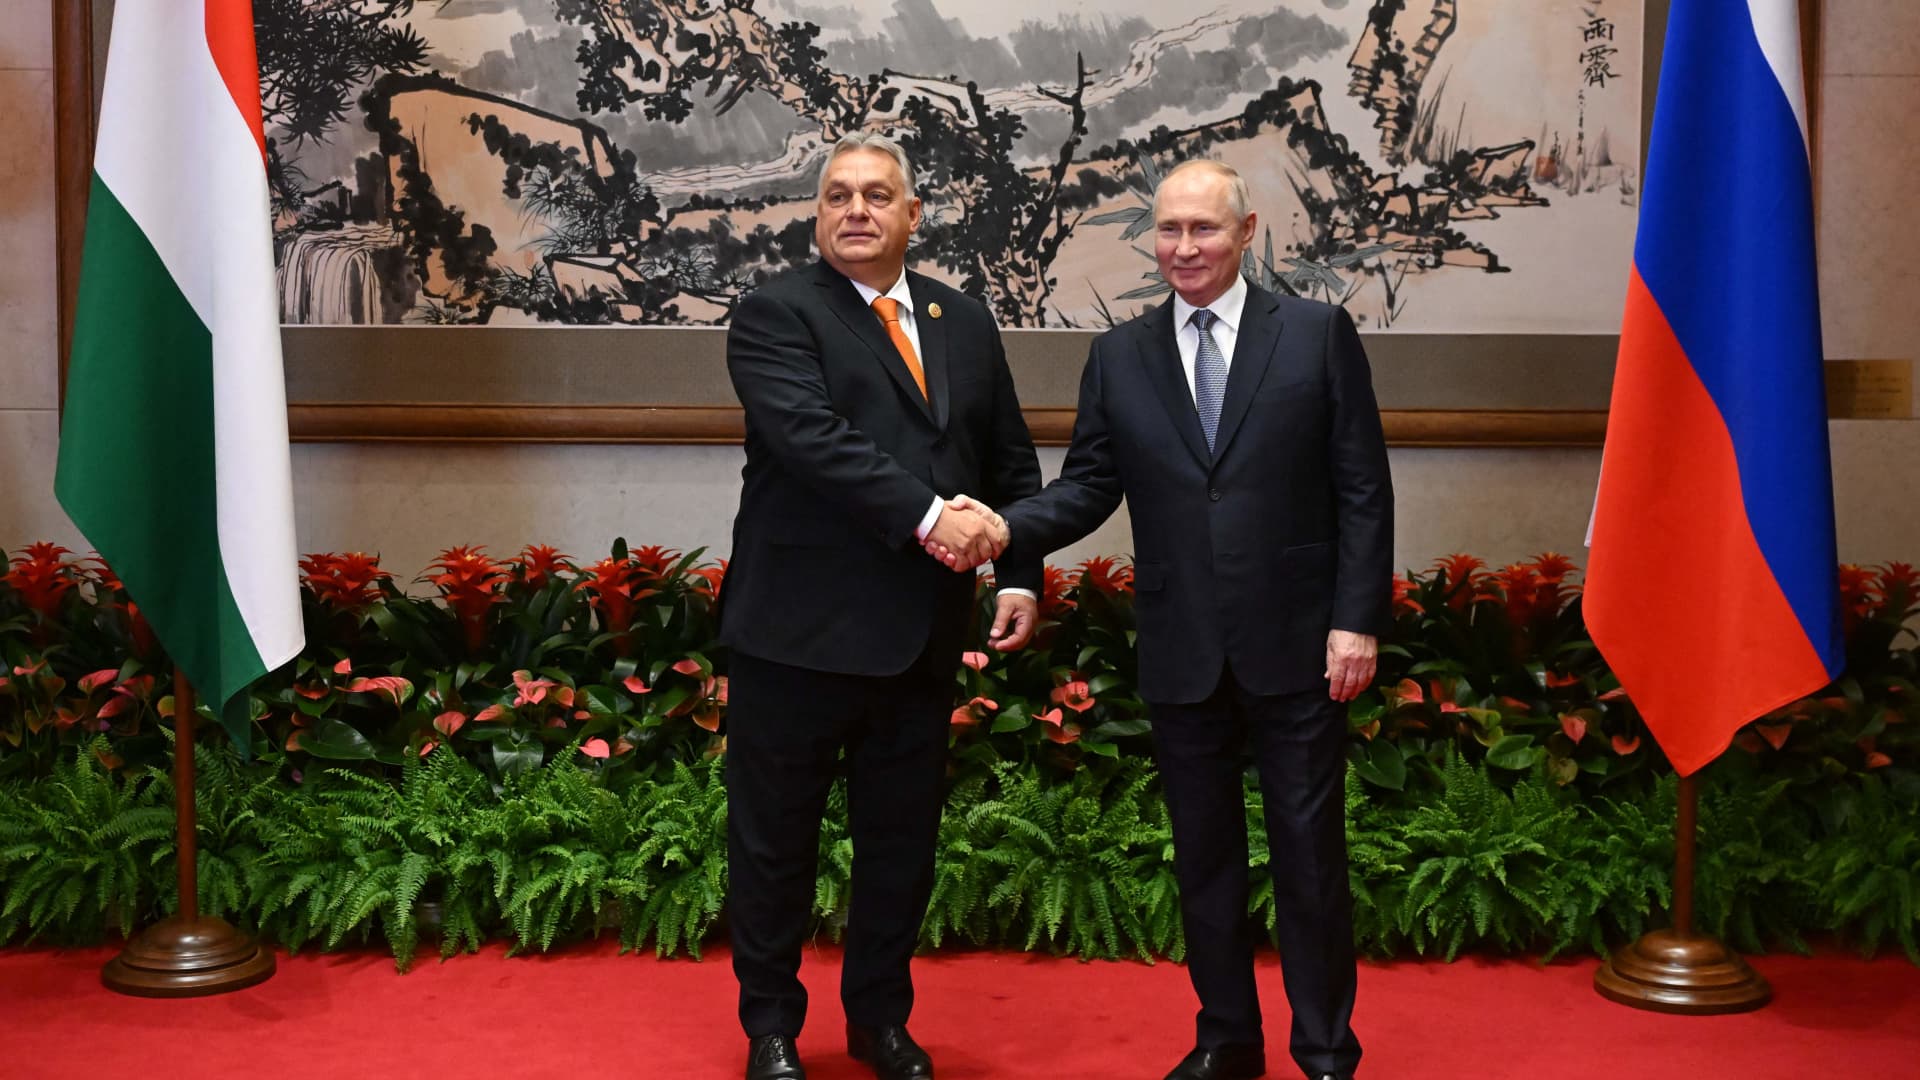 A pool photograph distributed by Russian state owned agency Sputnik shows Russia's President Vladimir Putin meeting with Hungarian Prime Minister Viktor Orban on the sidelines of the Third Belt and Road Forum in Beijing on October 17, 2023.